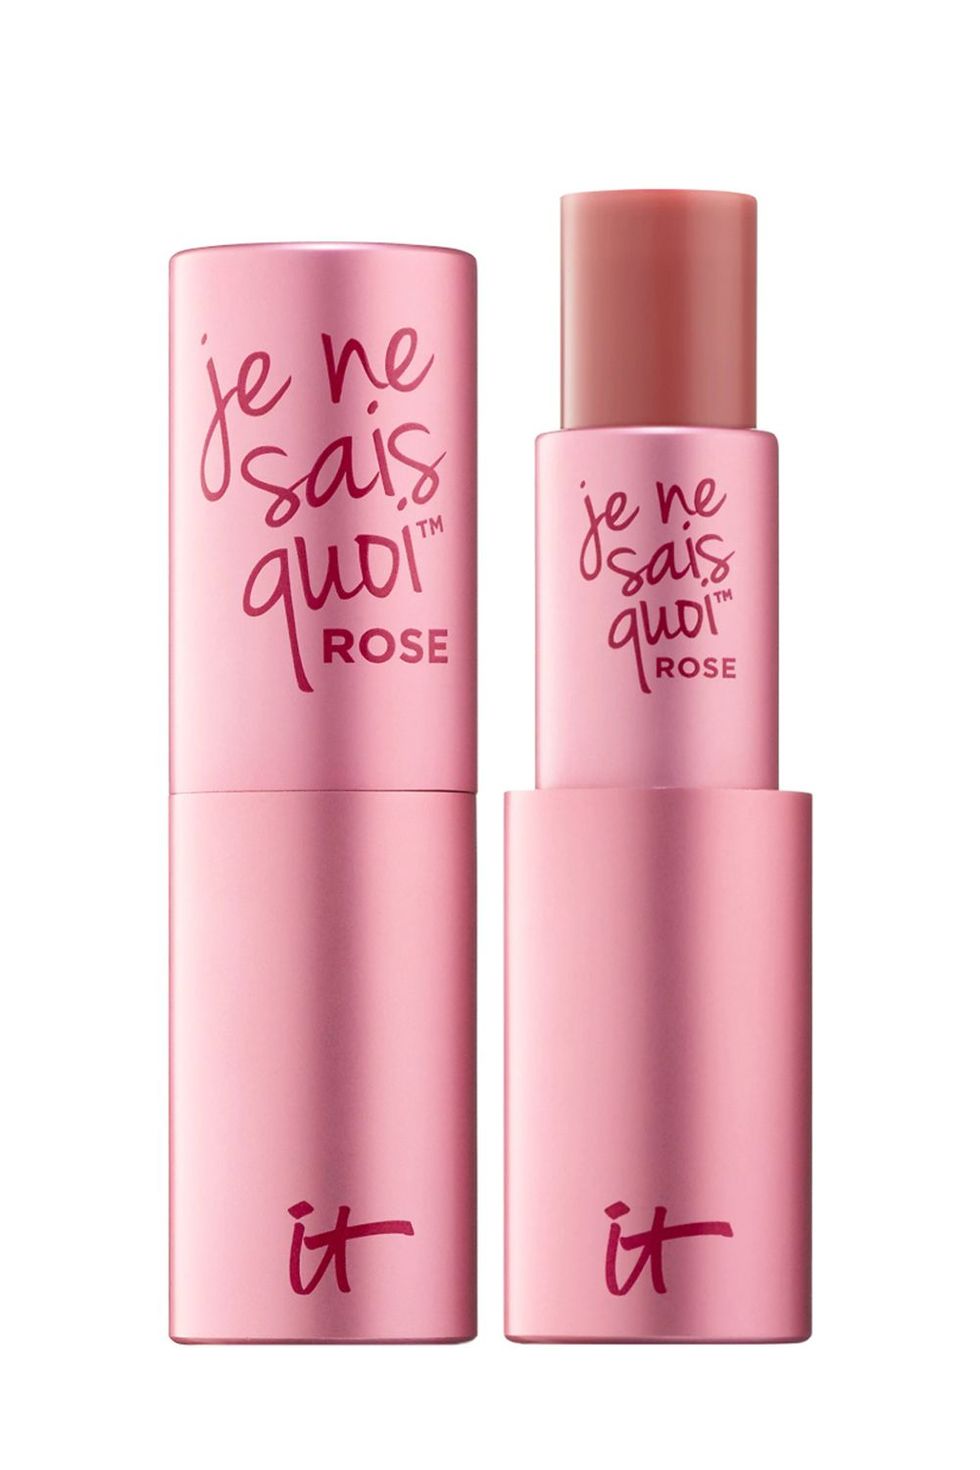 The 14 Best Tinted Lip Balm Formulas for a Flattering Dose of Color